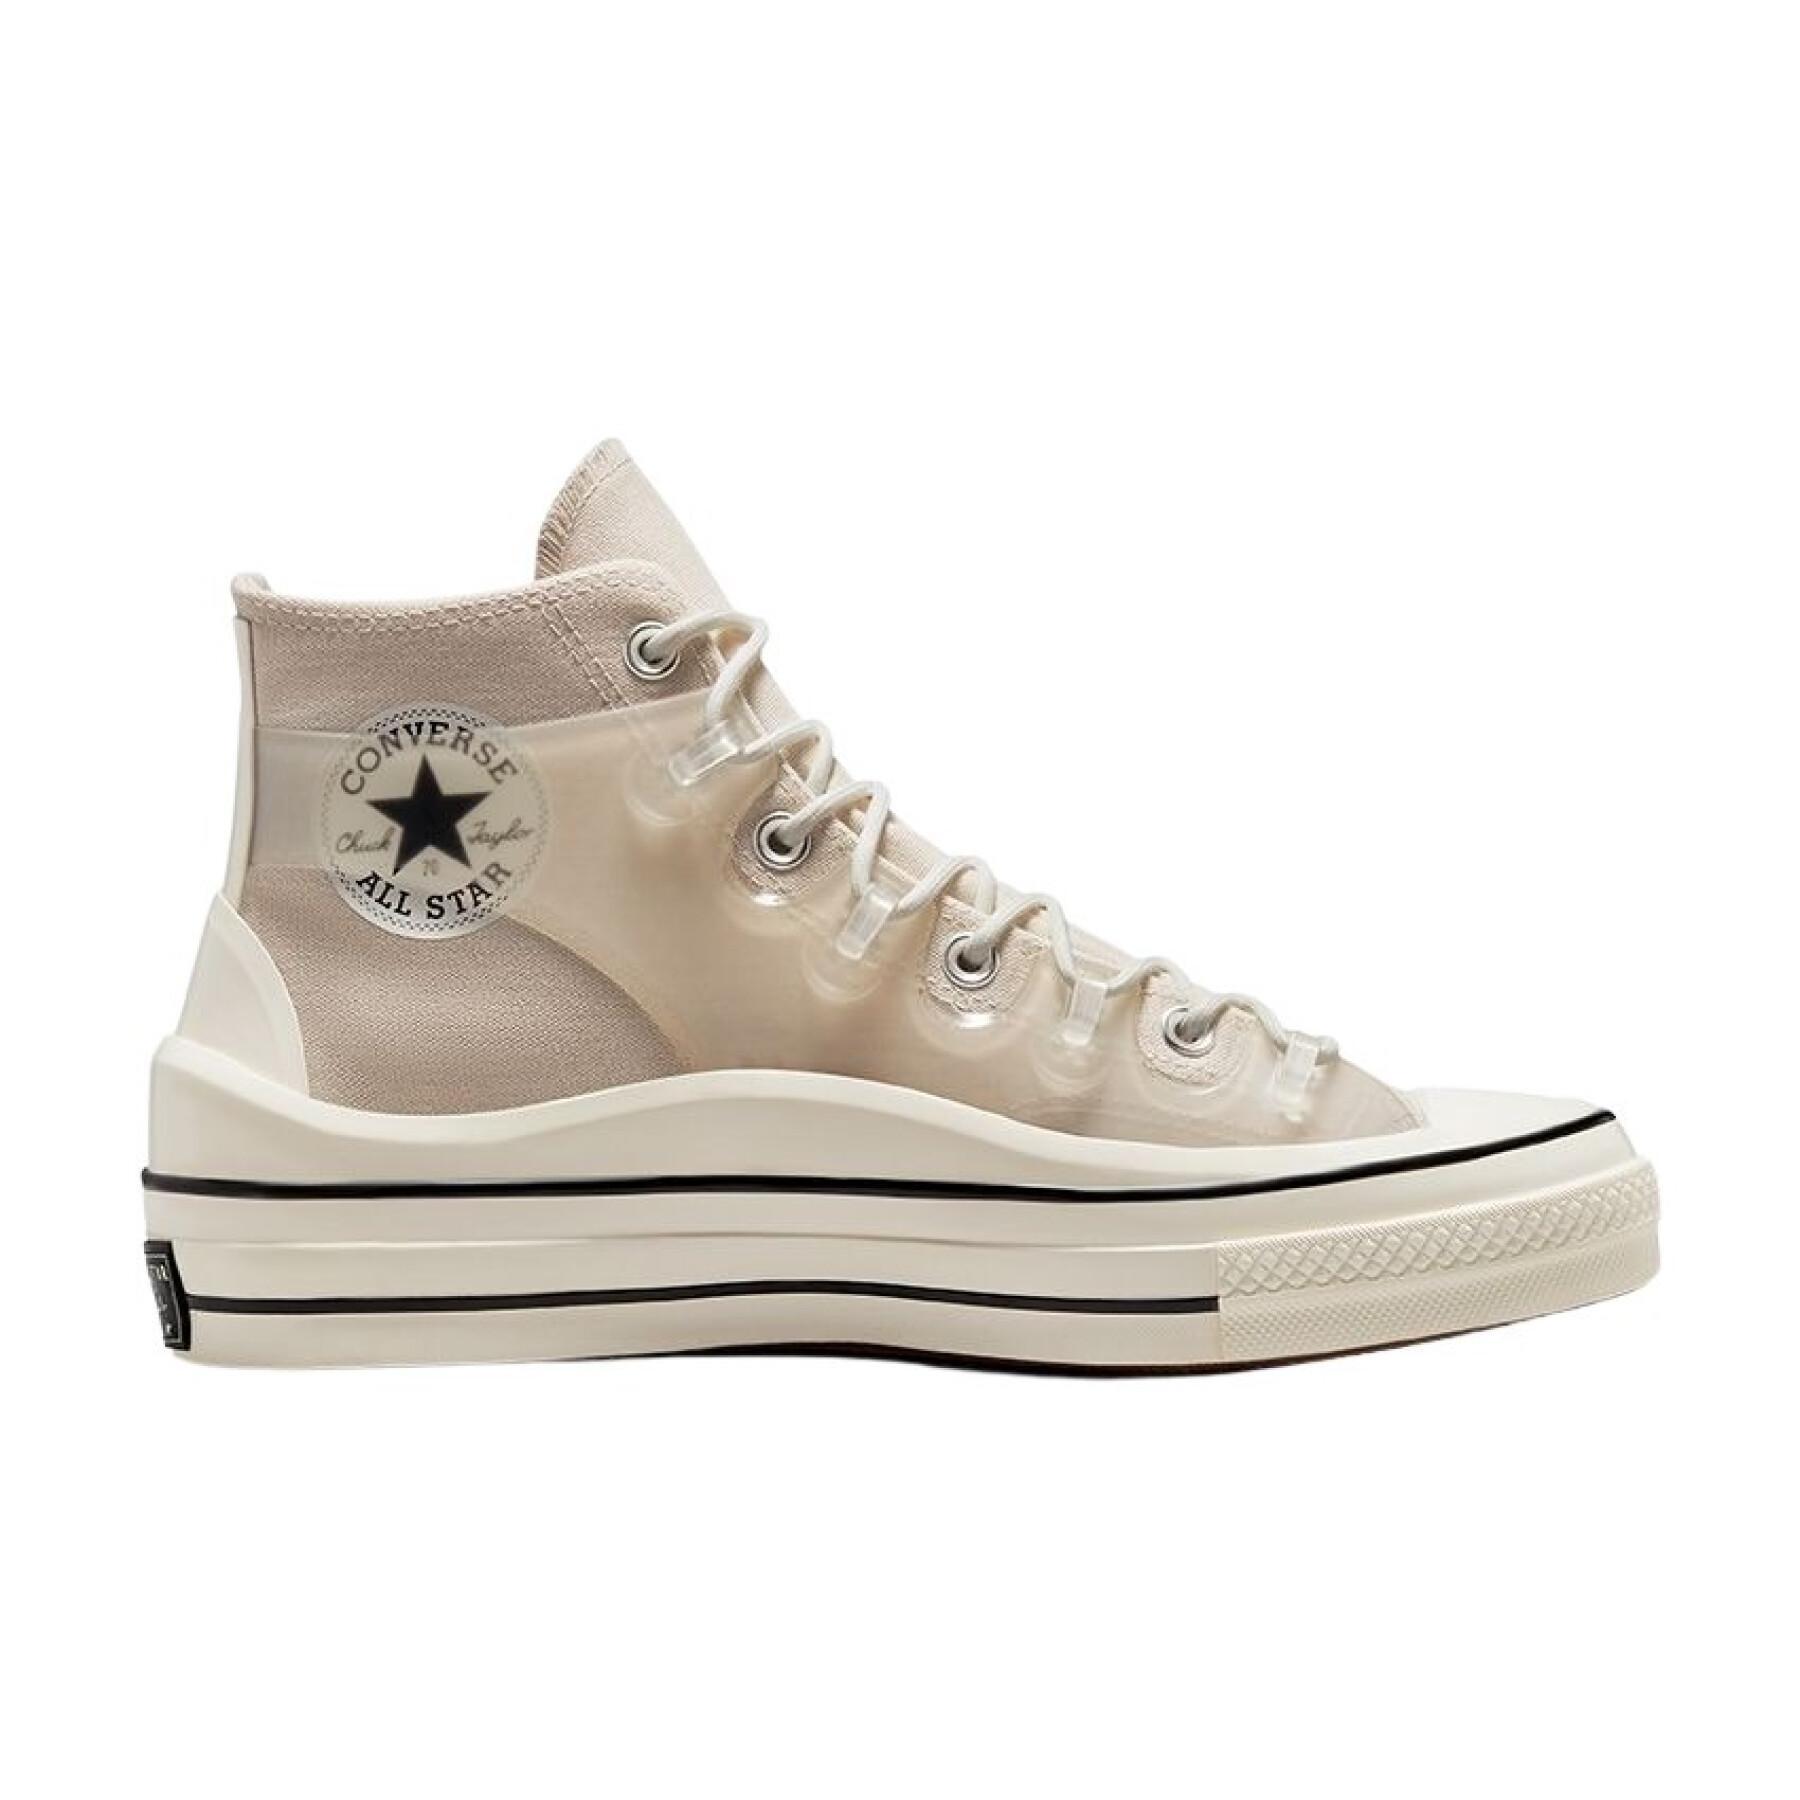 Trainers Converse Hybrid Function Chuck 70 Utility